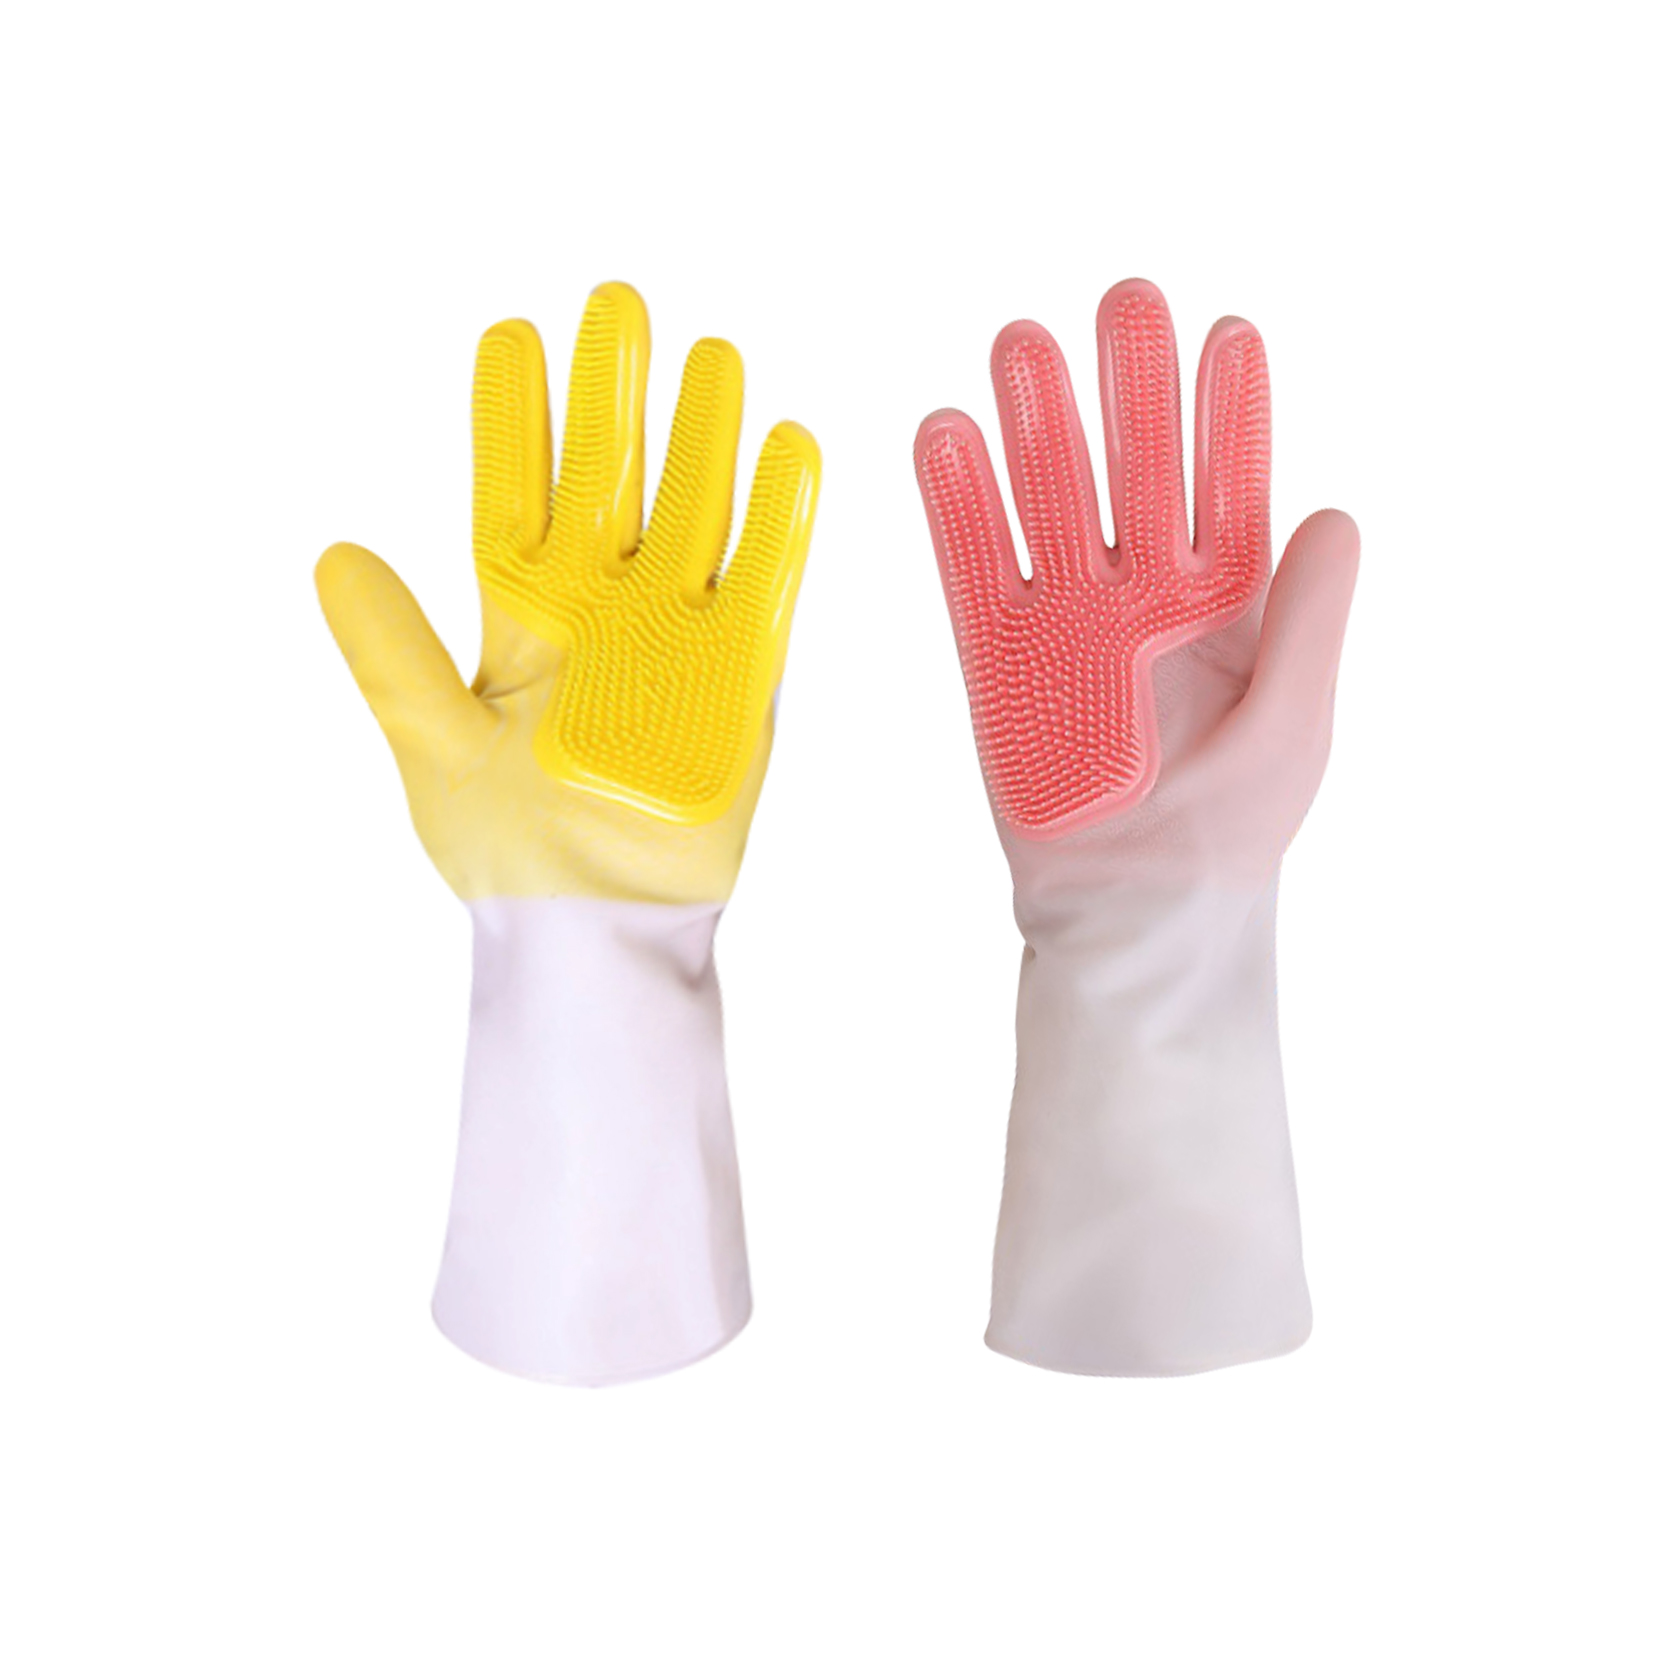 Home Silicone Washing Cleaning Gloves Garden Kitchen Dish Food Grade Household Cleaning Dishwashing Gloves For Washing